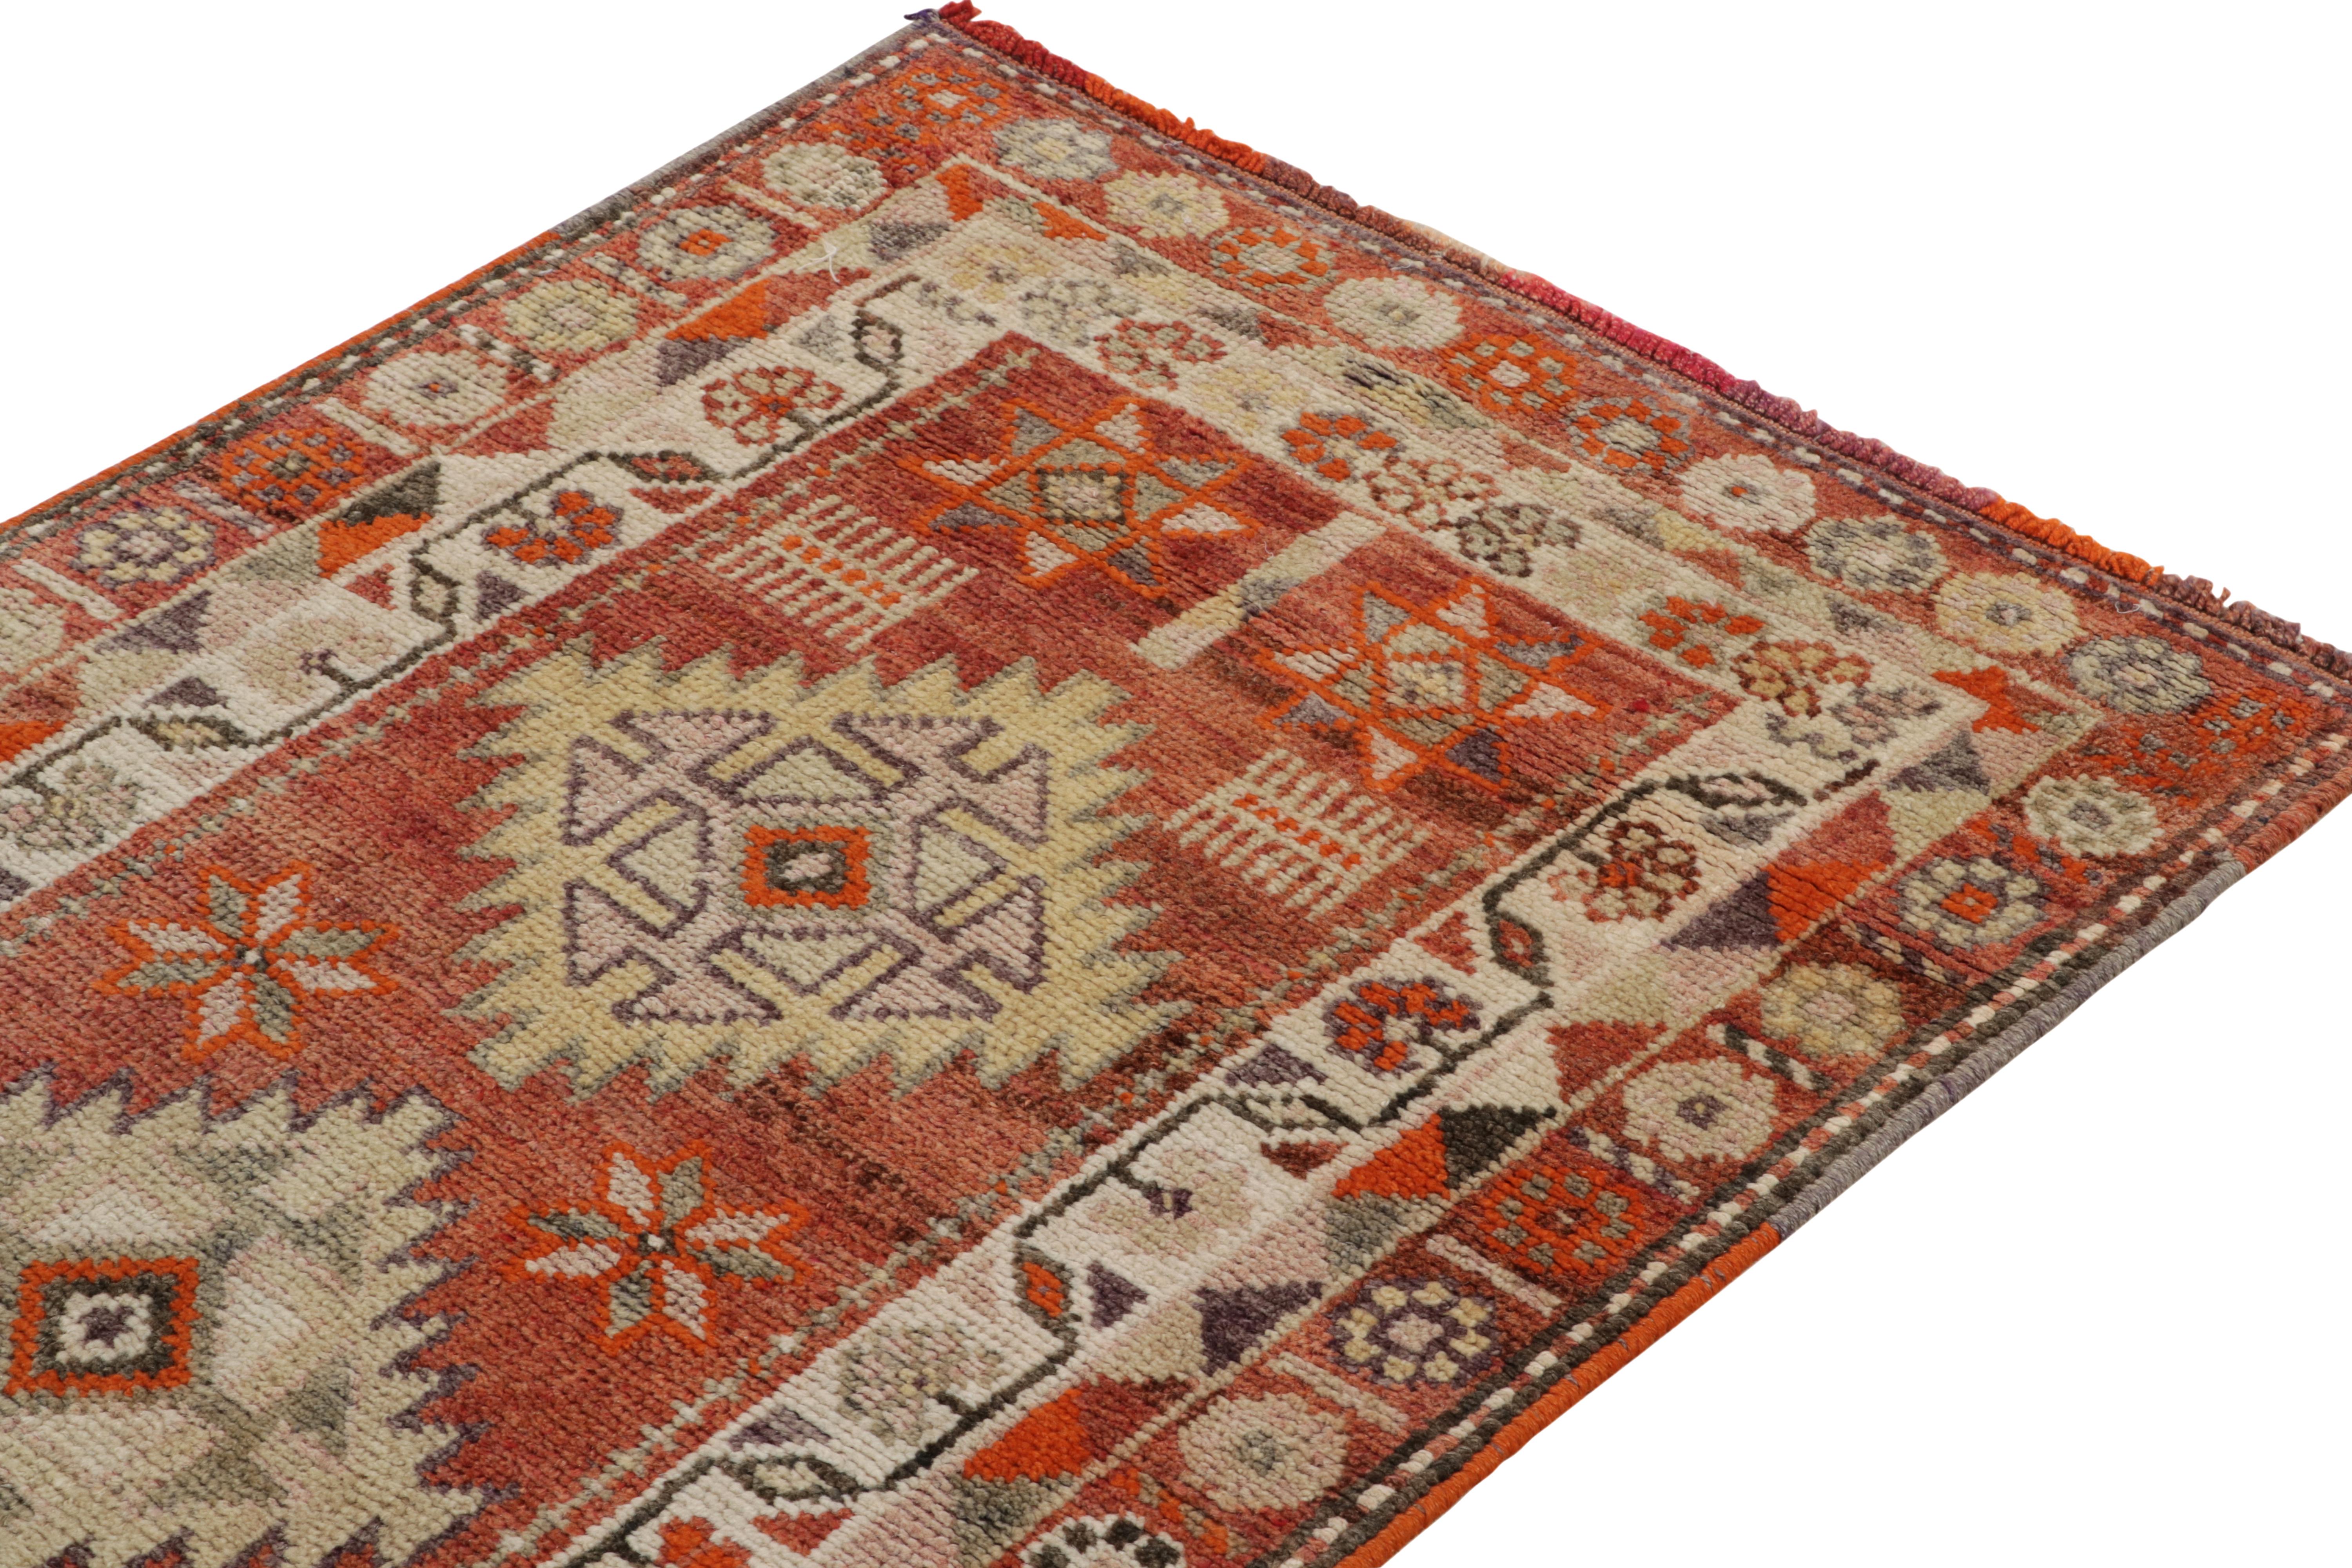 1950s Vintage Tribal runner in Red, Orange and Beige-Brown Geometric Patterns In Good Condition For Sale In Long Island City, NY